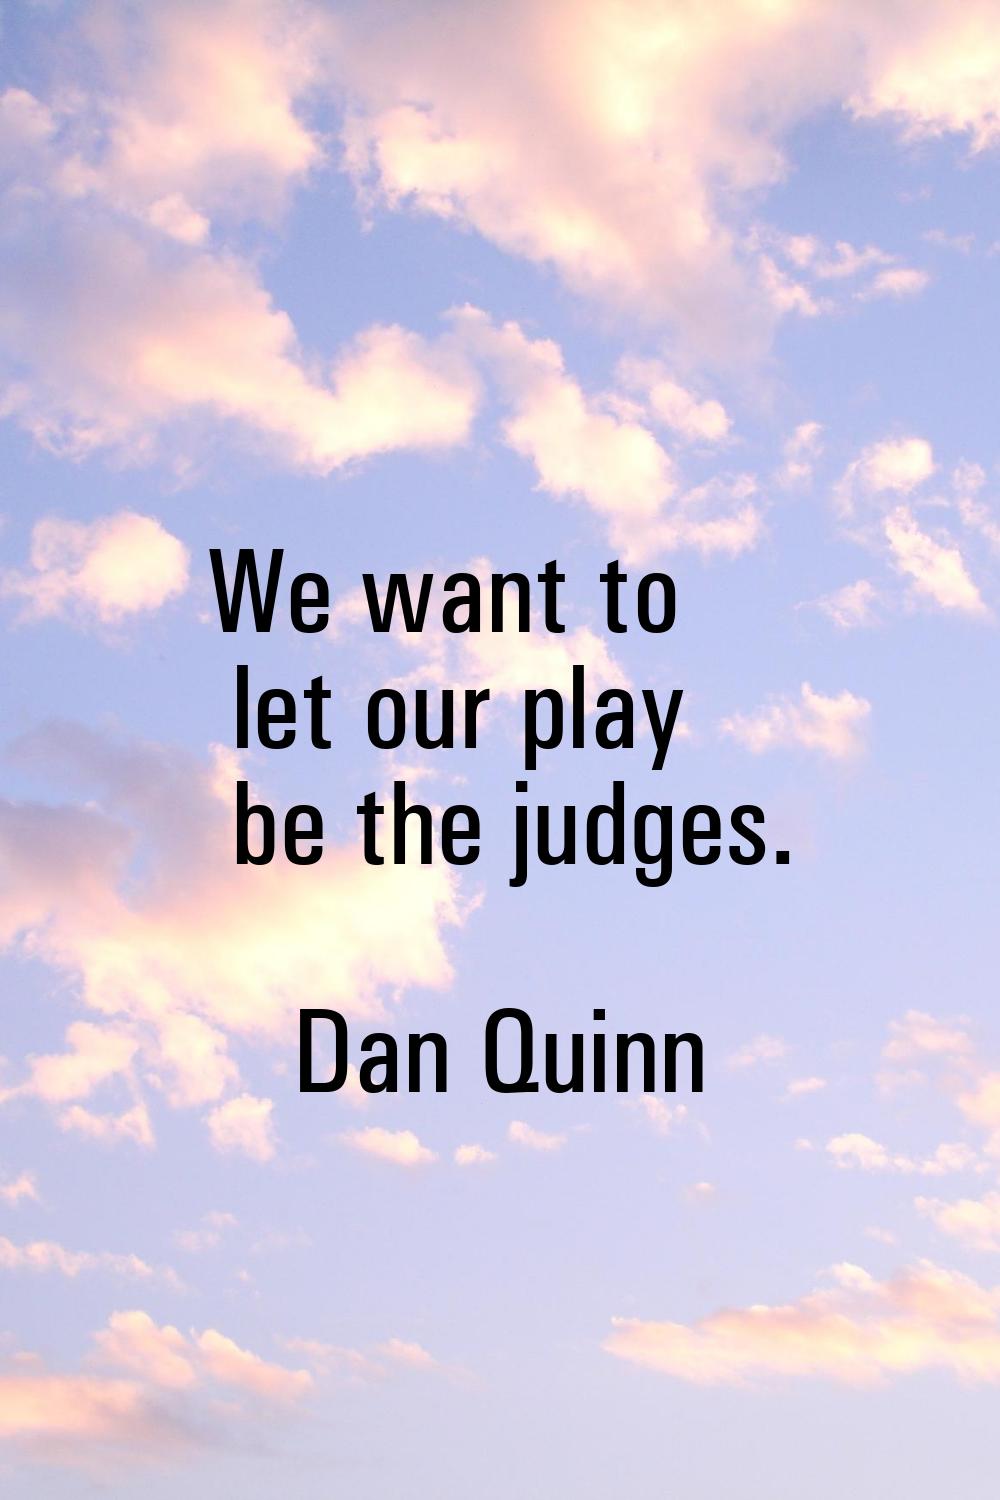 We want to let our play be the judges.